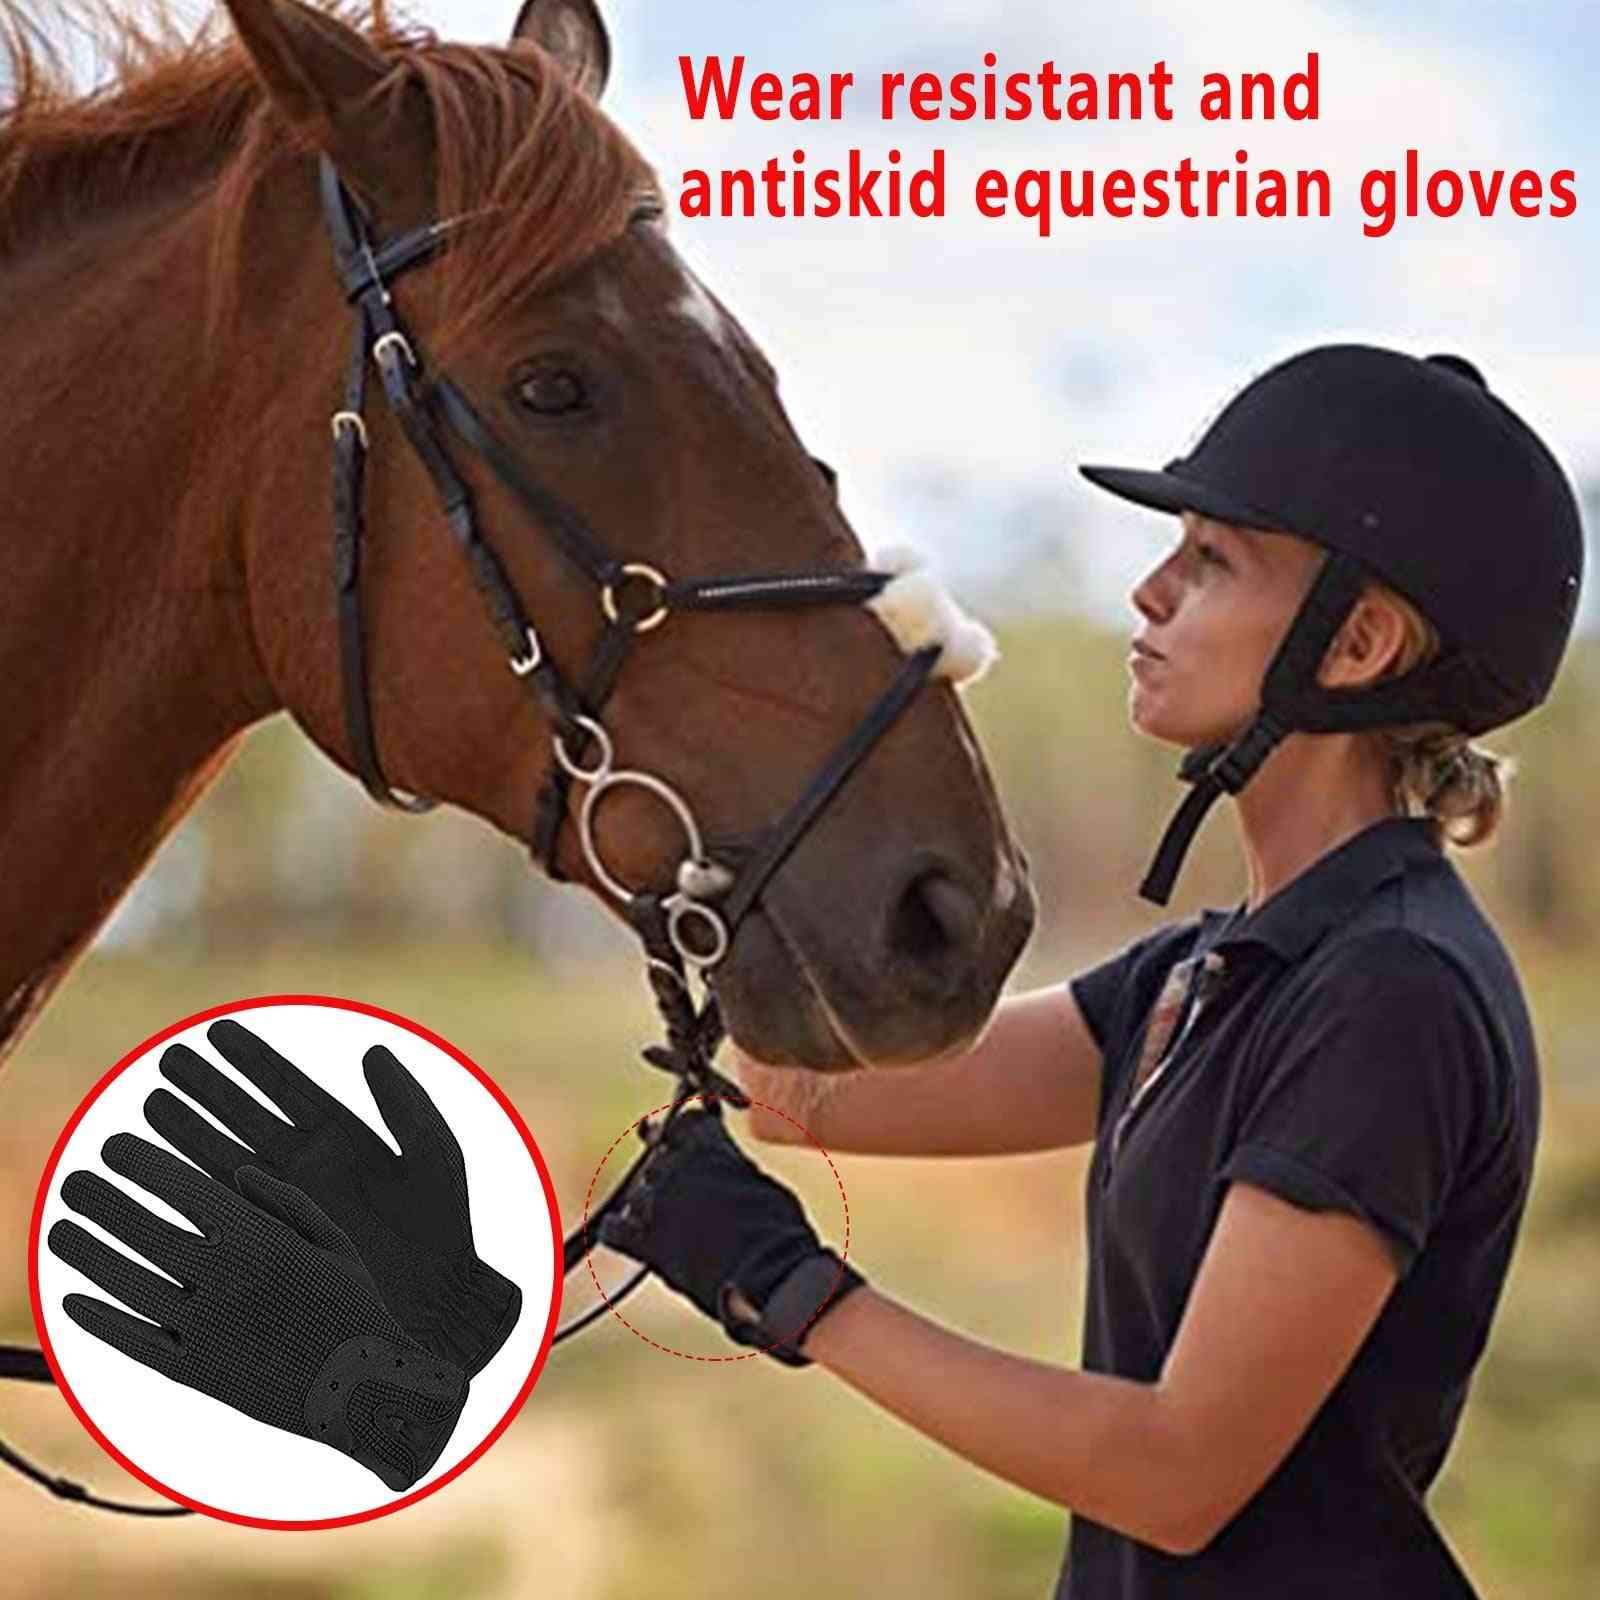 Leather Riding Gloves Cotton Fabric Gloves